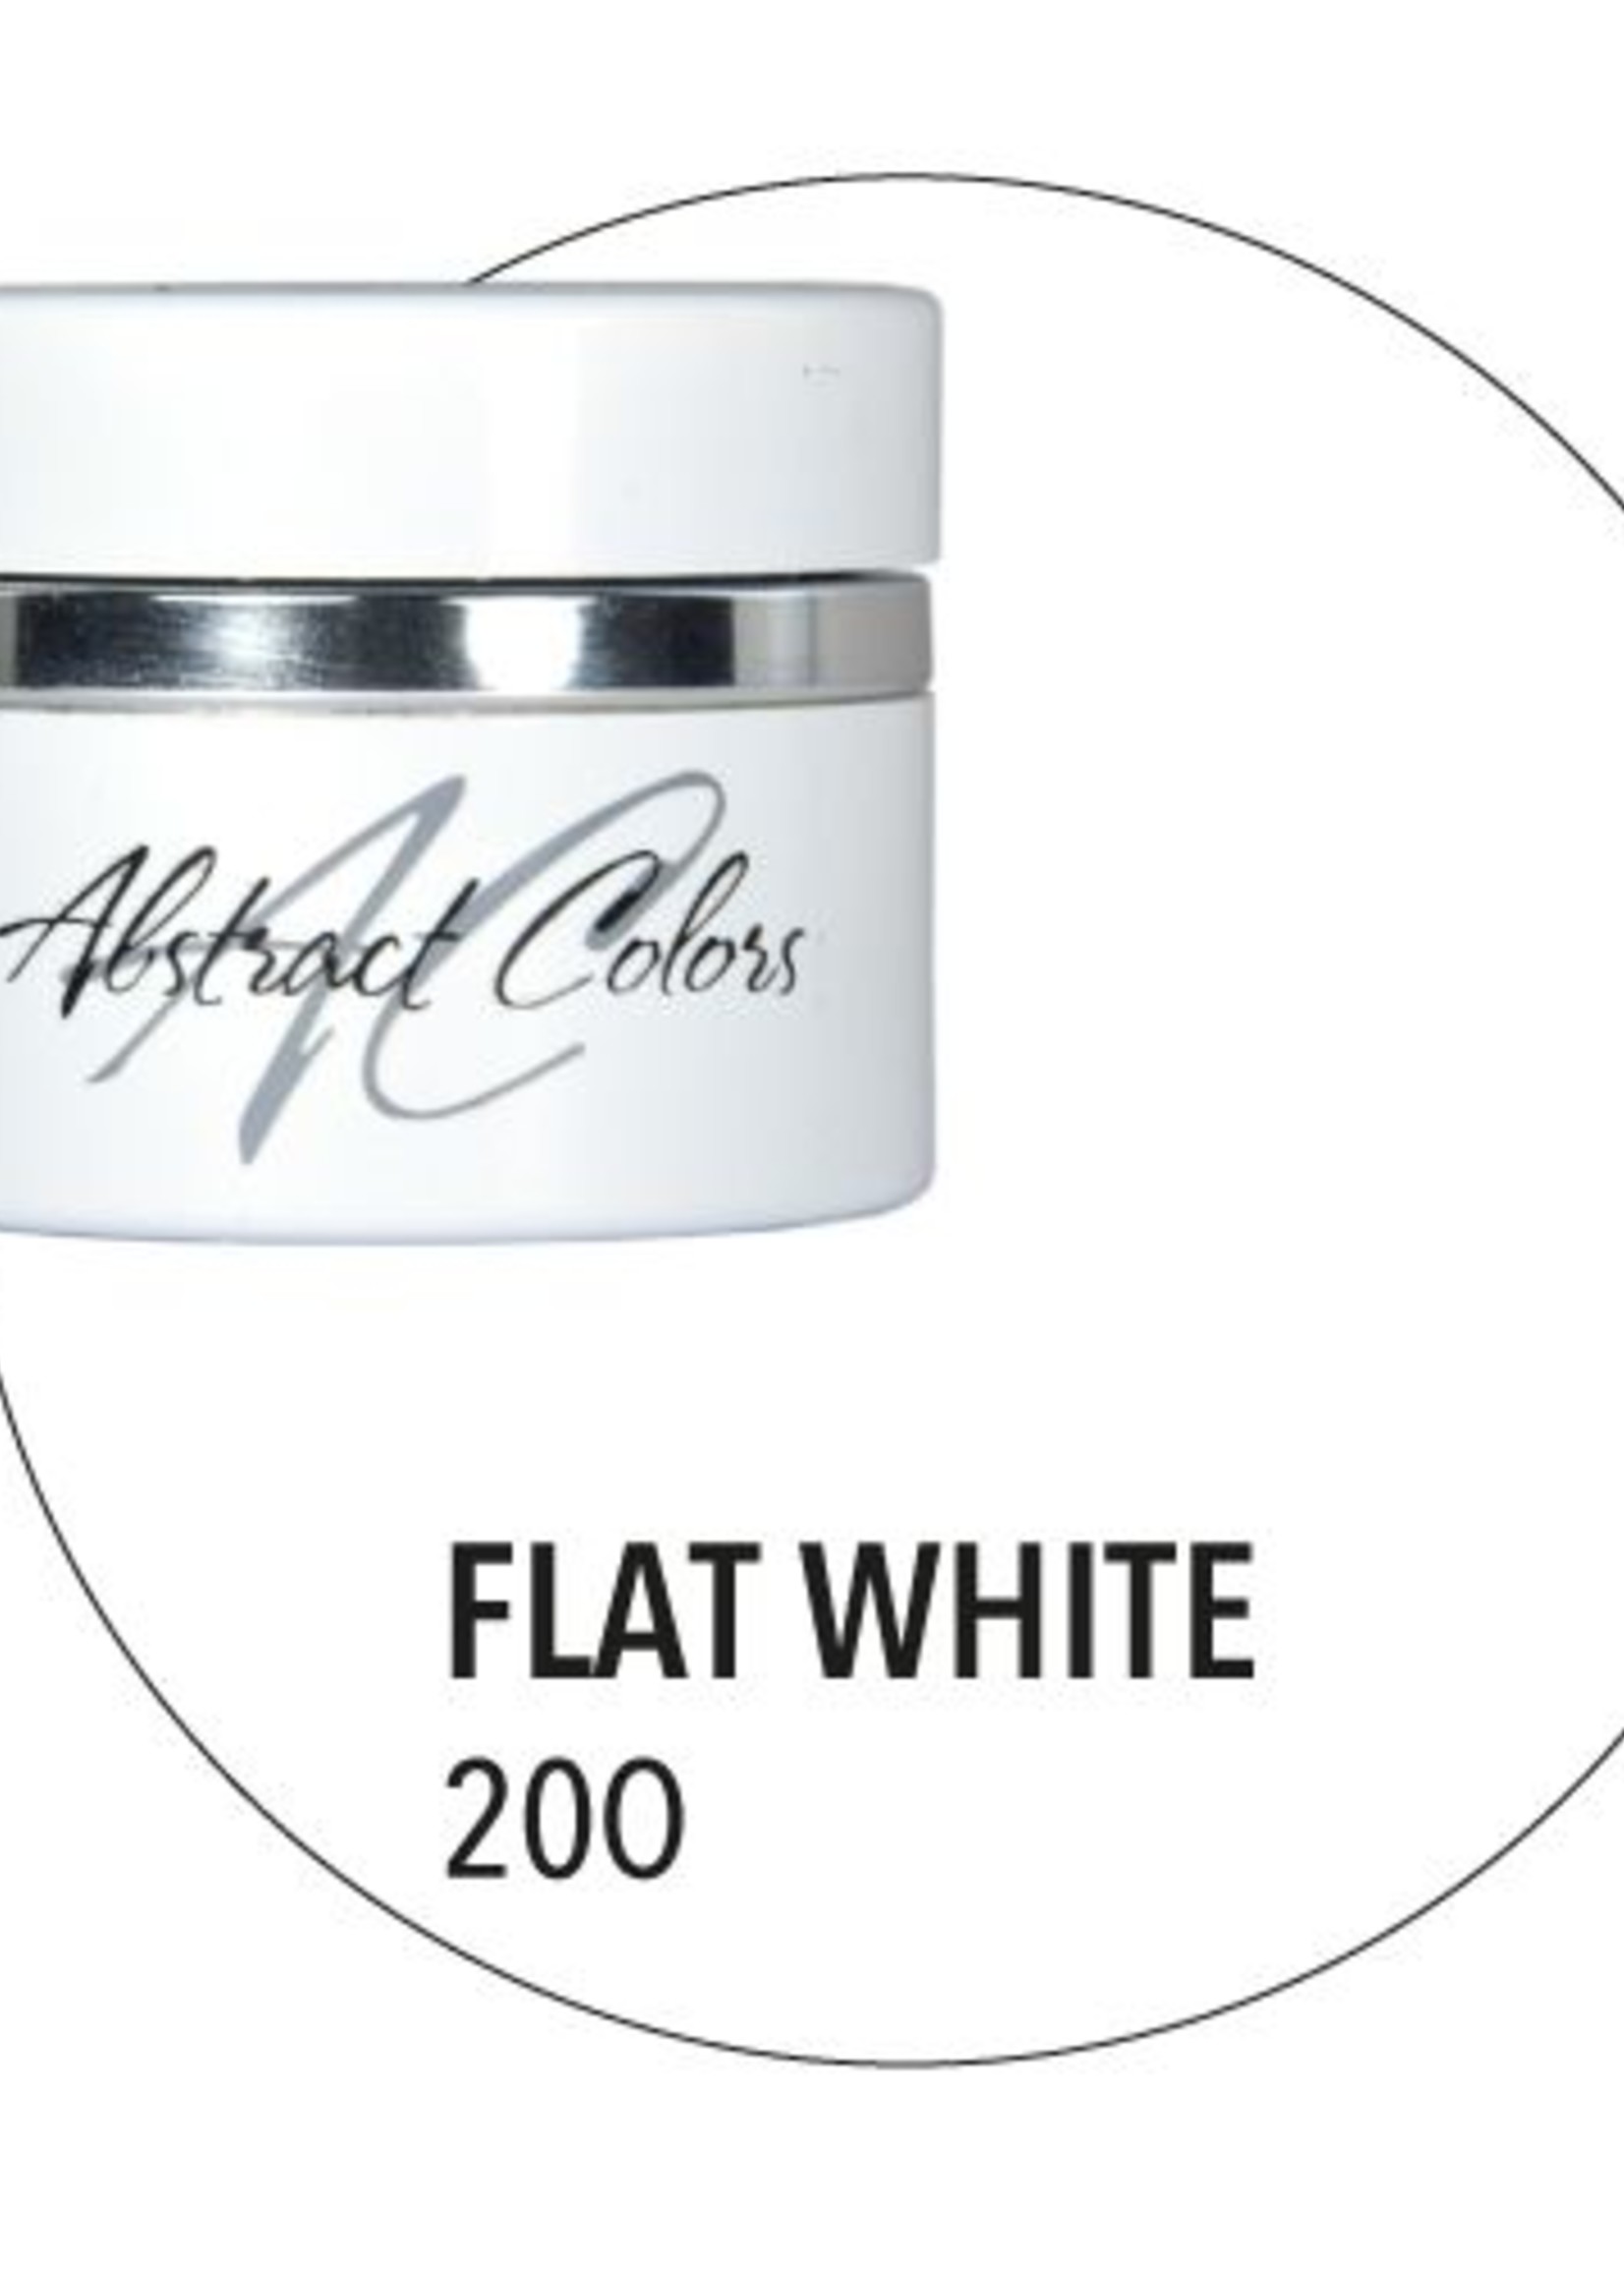 Abstract® Colorgel 5 ml Flat White CG200